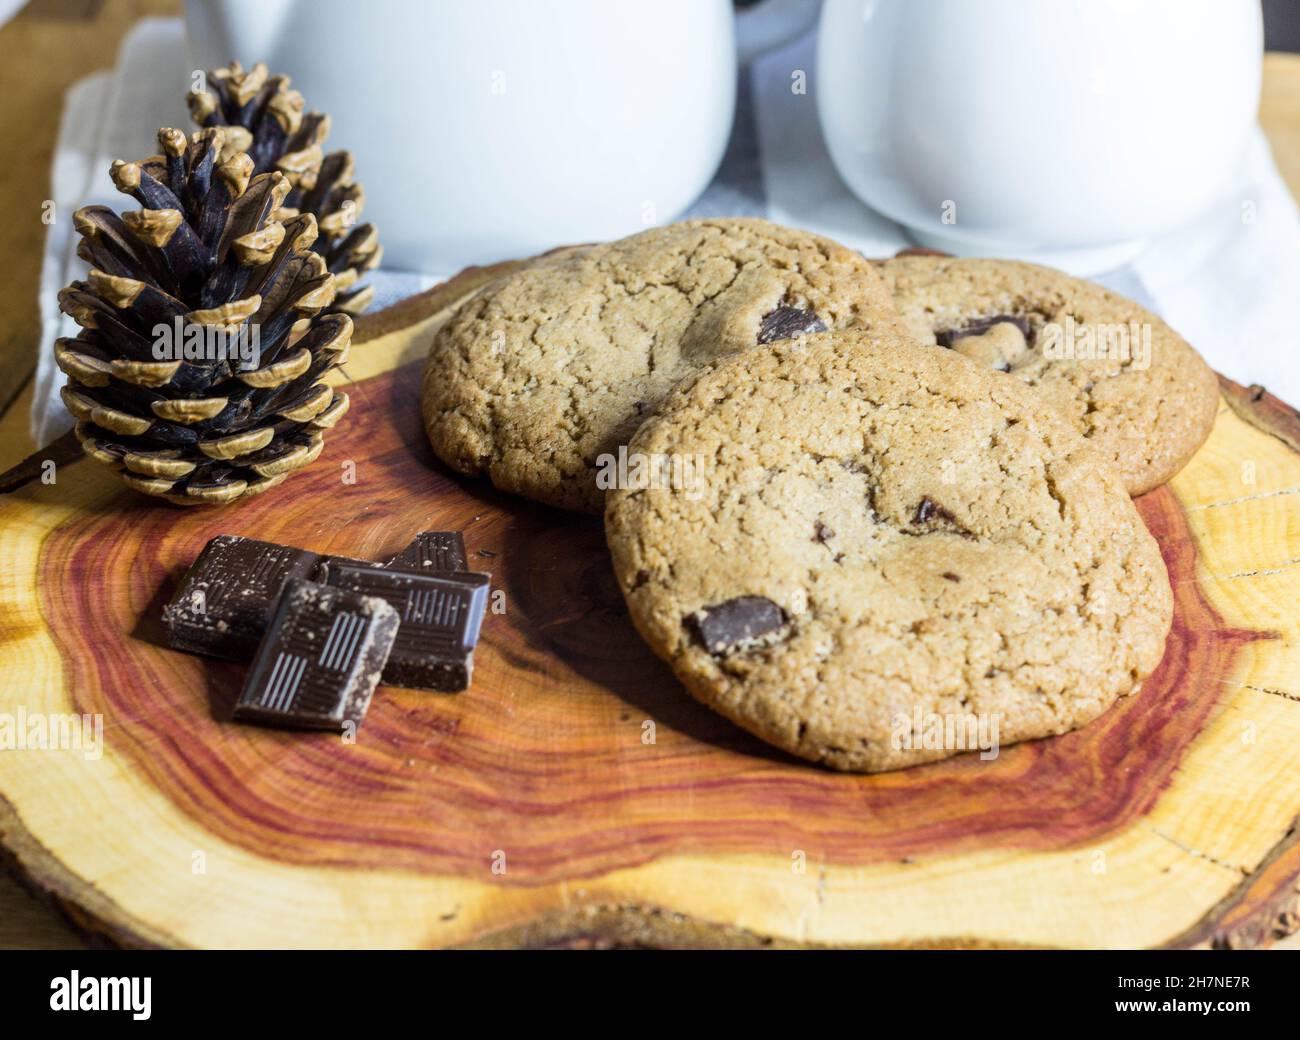 Chocolate Chip Cookies on Log Wooden Board Served with Chocolate Pieces and Tea Decorated with Pine Cone. Selective Focus Stock Photo